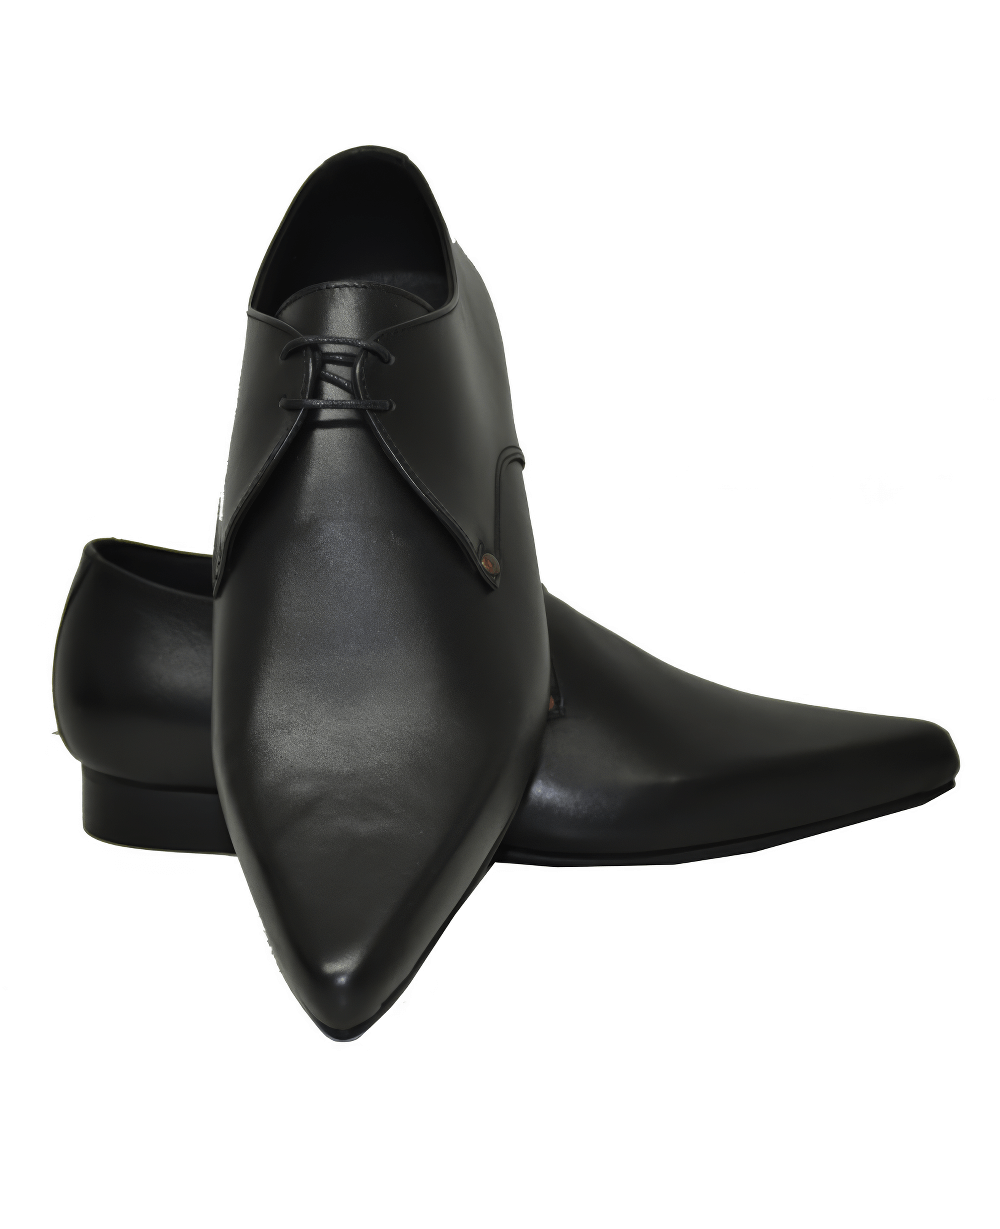 Men's Pointy Toe Black Oxford Shoes in Grained Leather